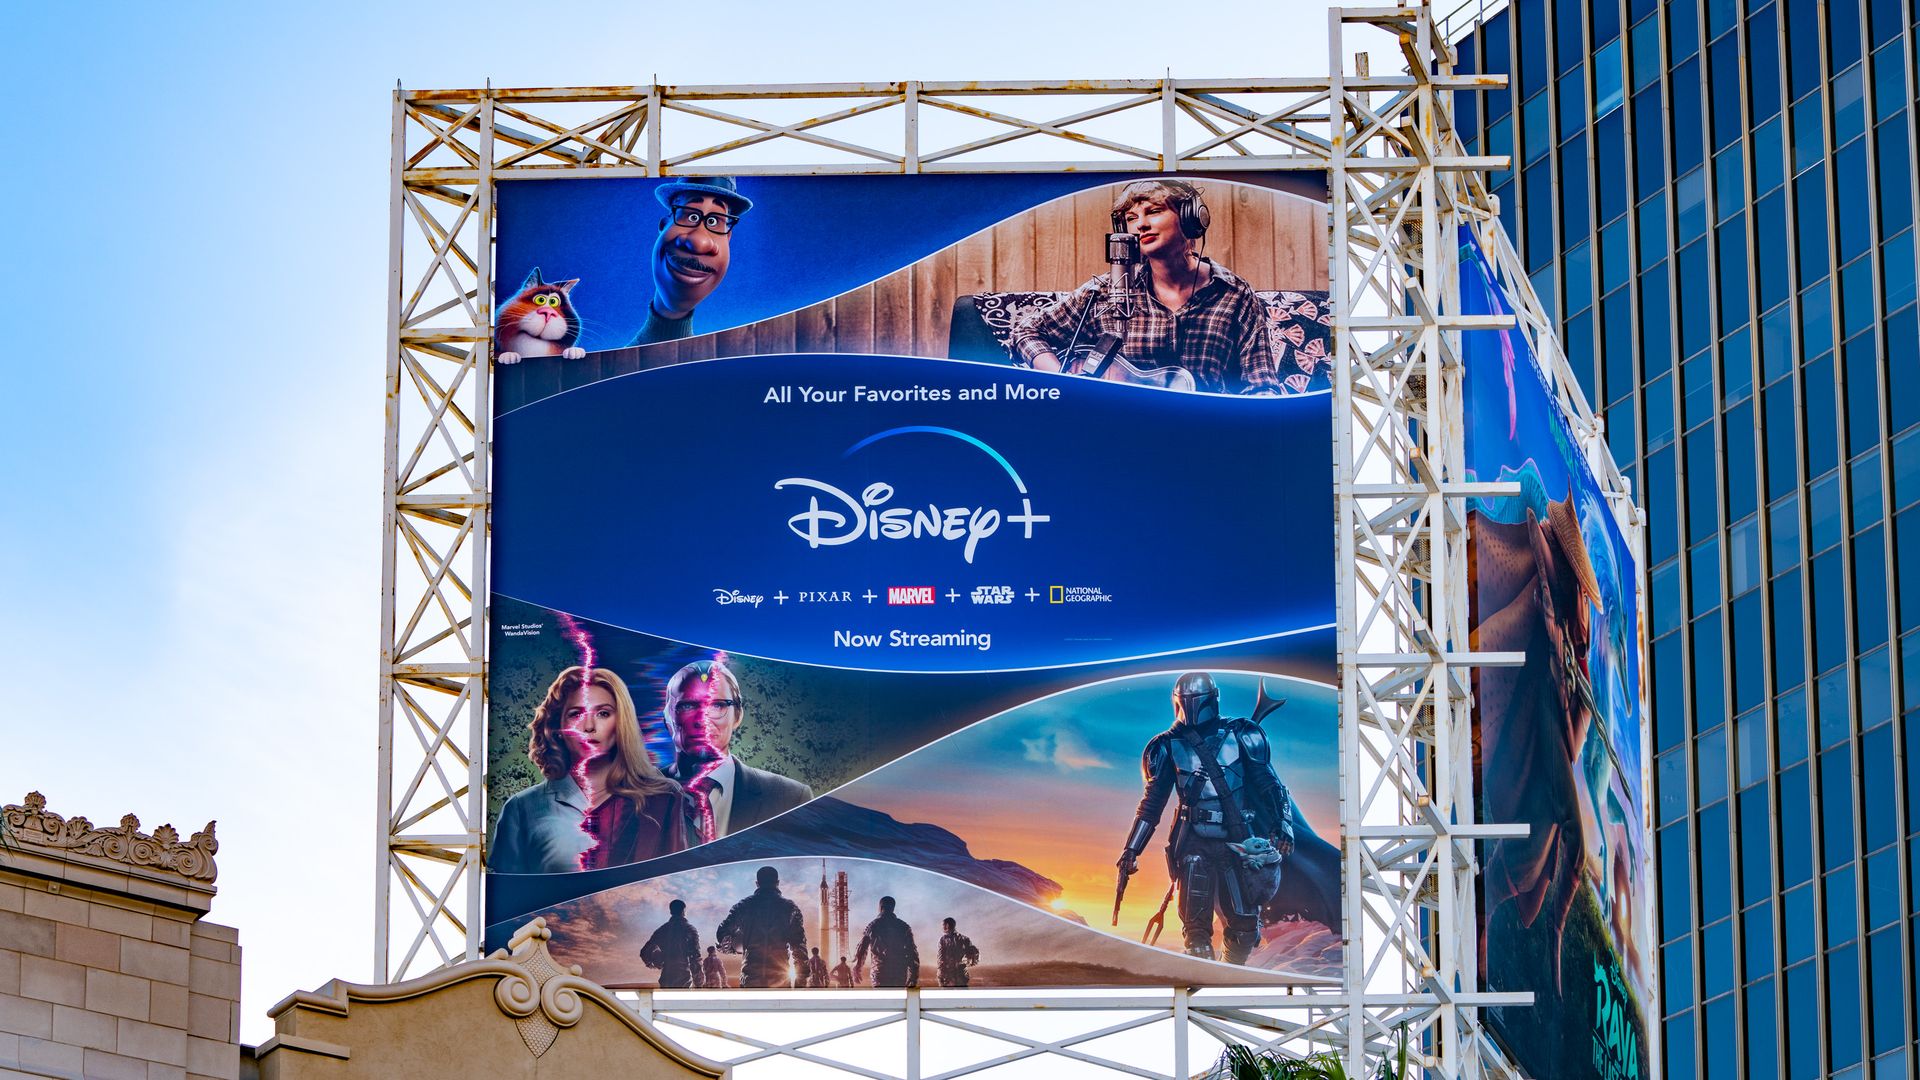 Photo of a Disney+ billboard with various characters from Disney films 